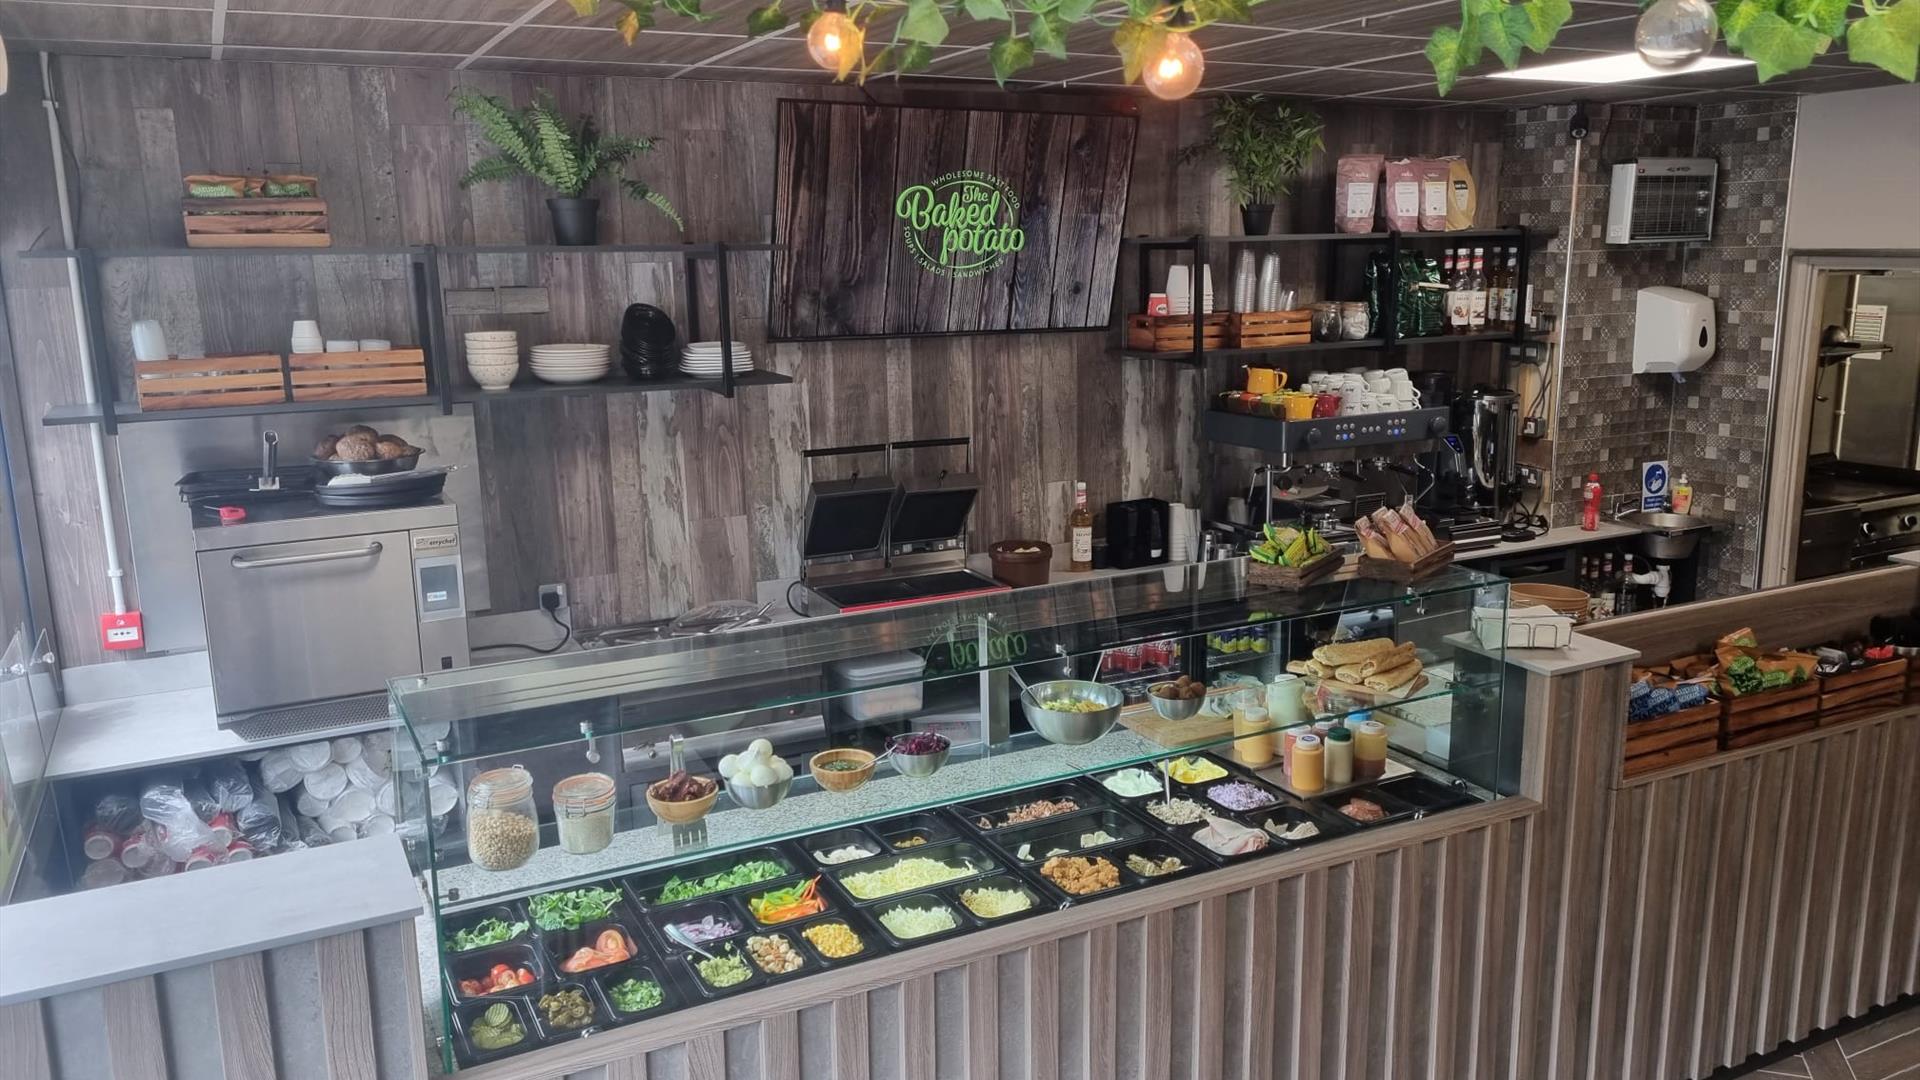 Image is of the deli counter at The Baked Potato in Lisburn